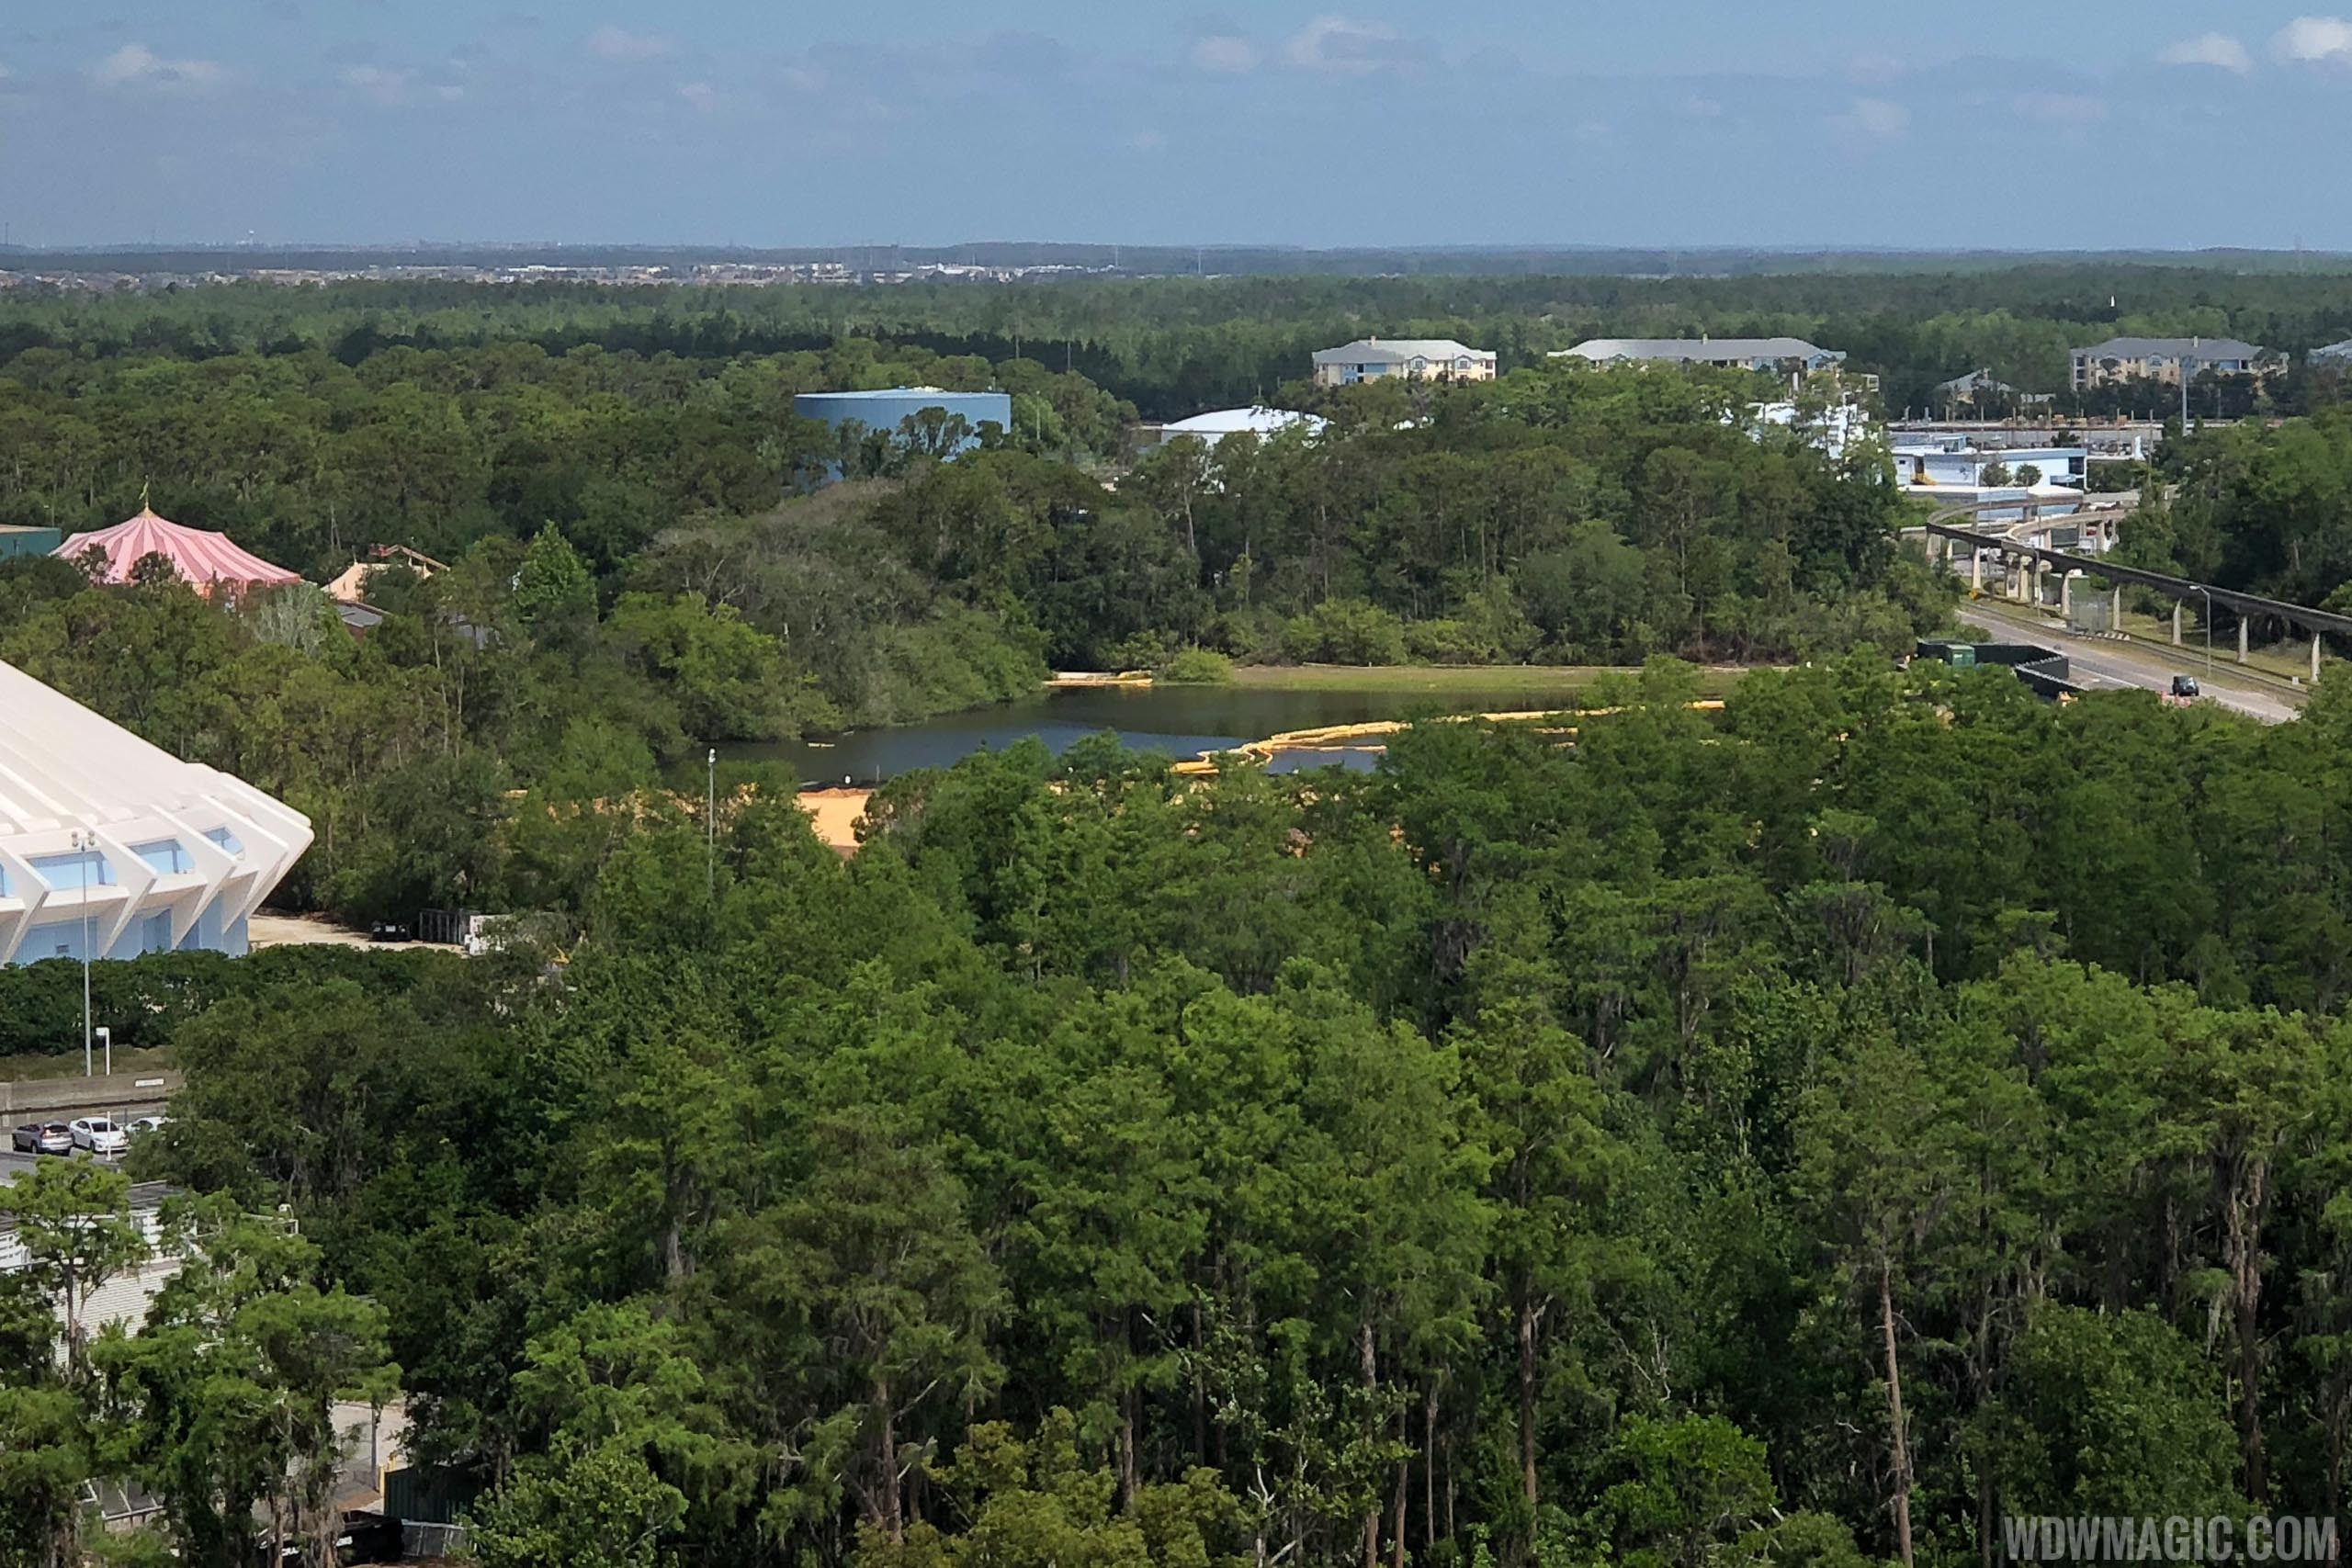 Tron ground clearing at the Magic Kingdom